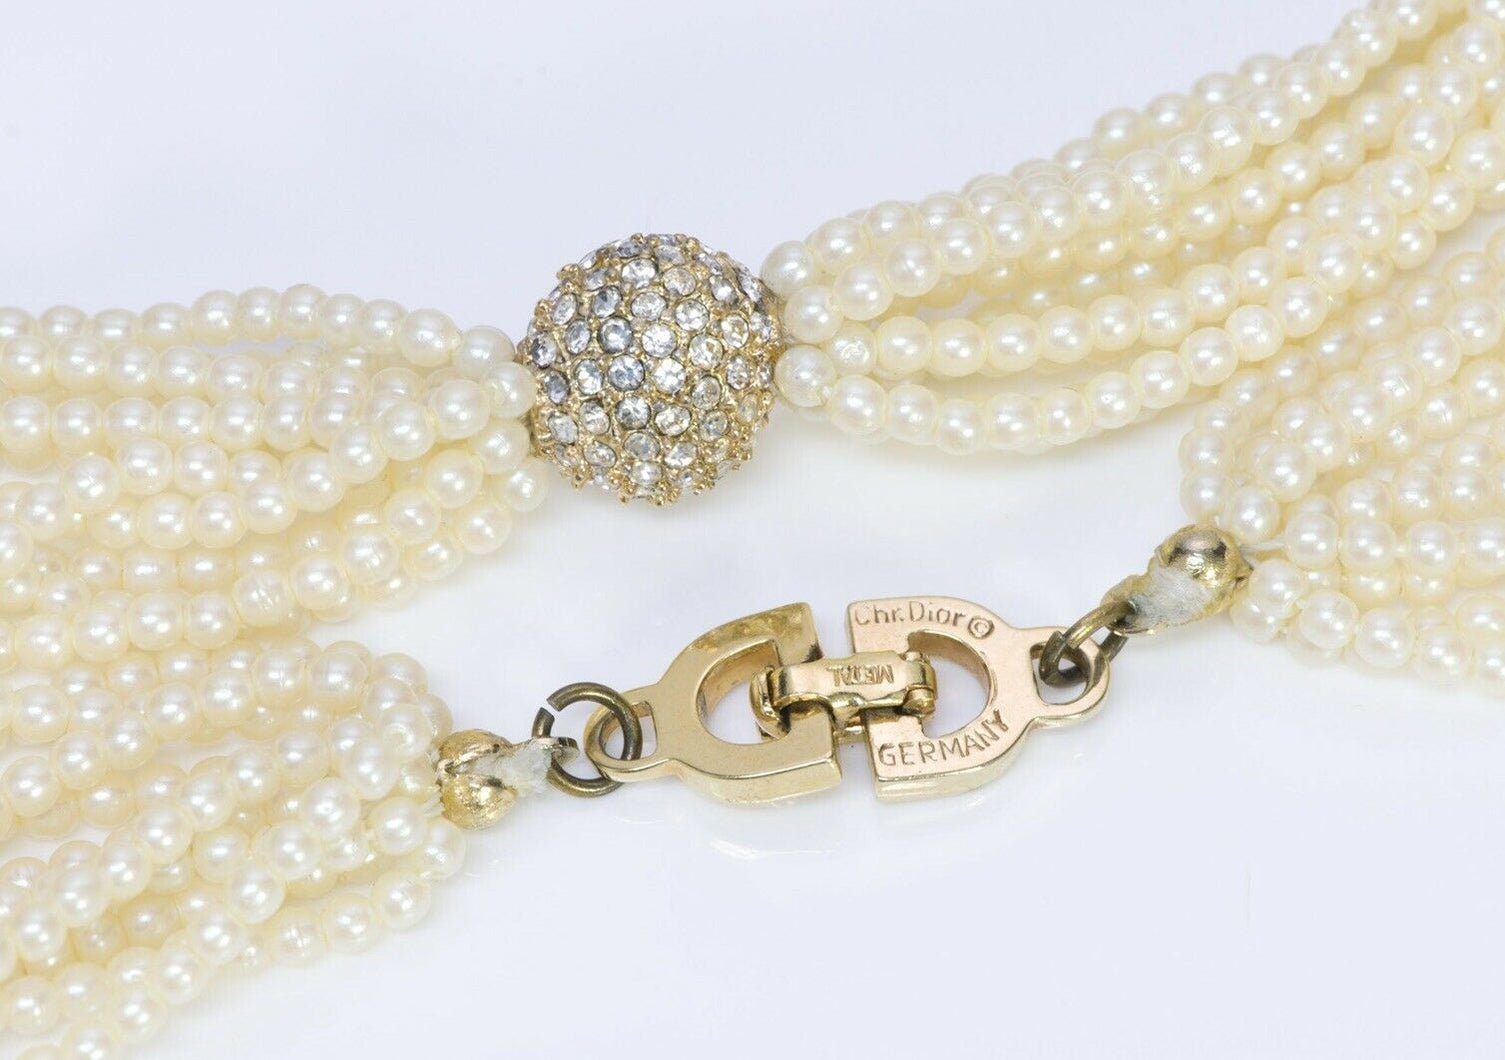 Christian Dior Henkel & Grosse 1950’s Pearl Crystal Necklace - DSF Antique Jewelry